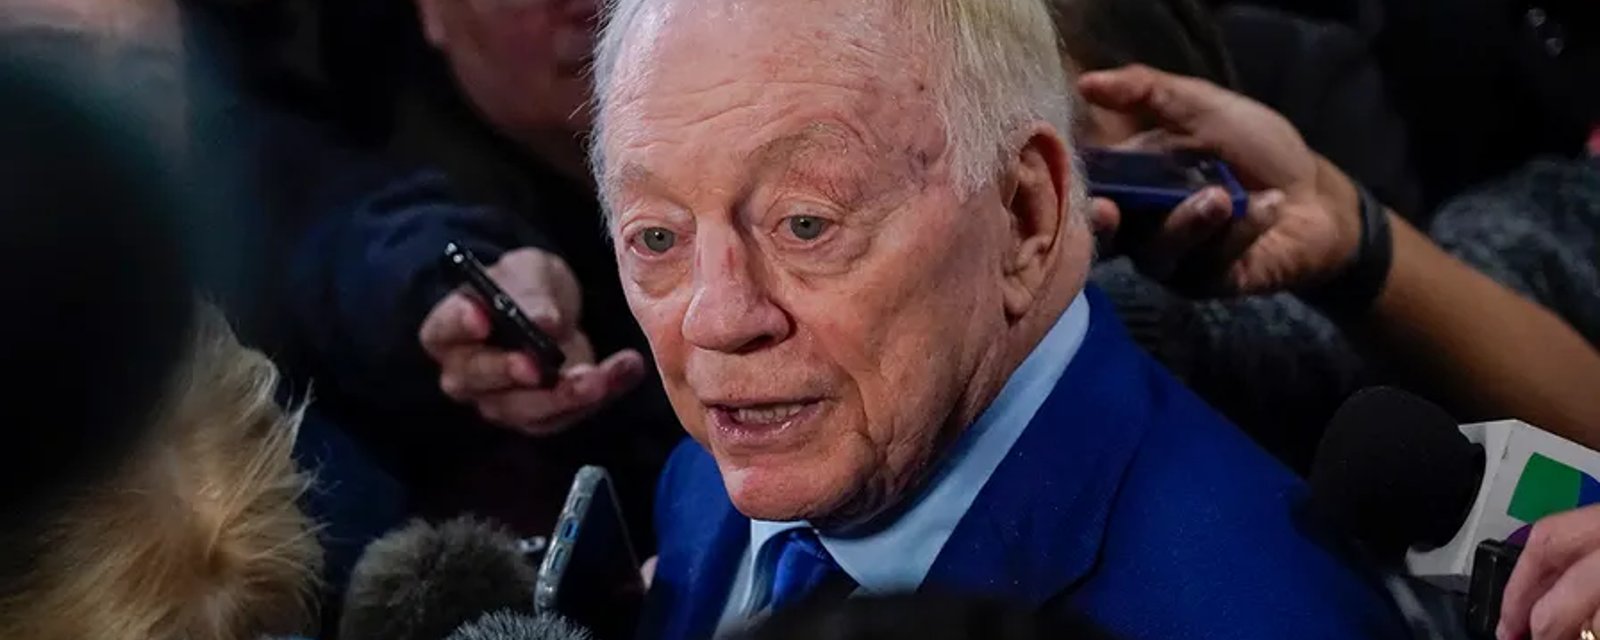 Jerry Jones' heartbreaking reaction to playoff loss